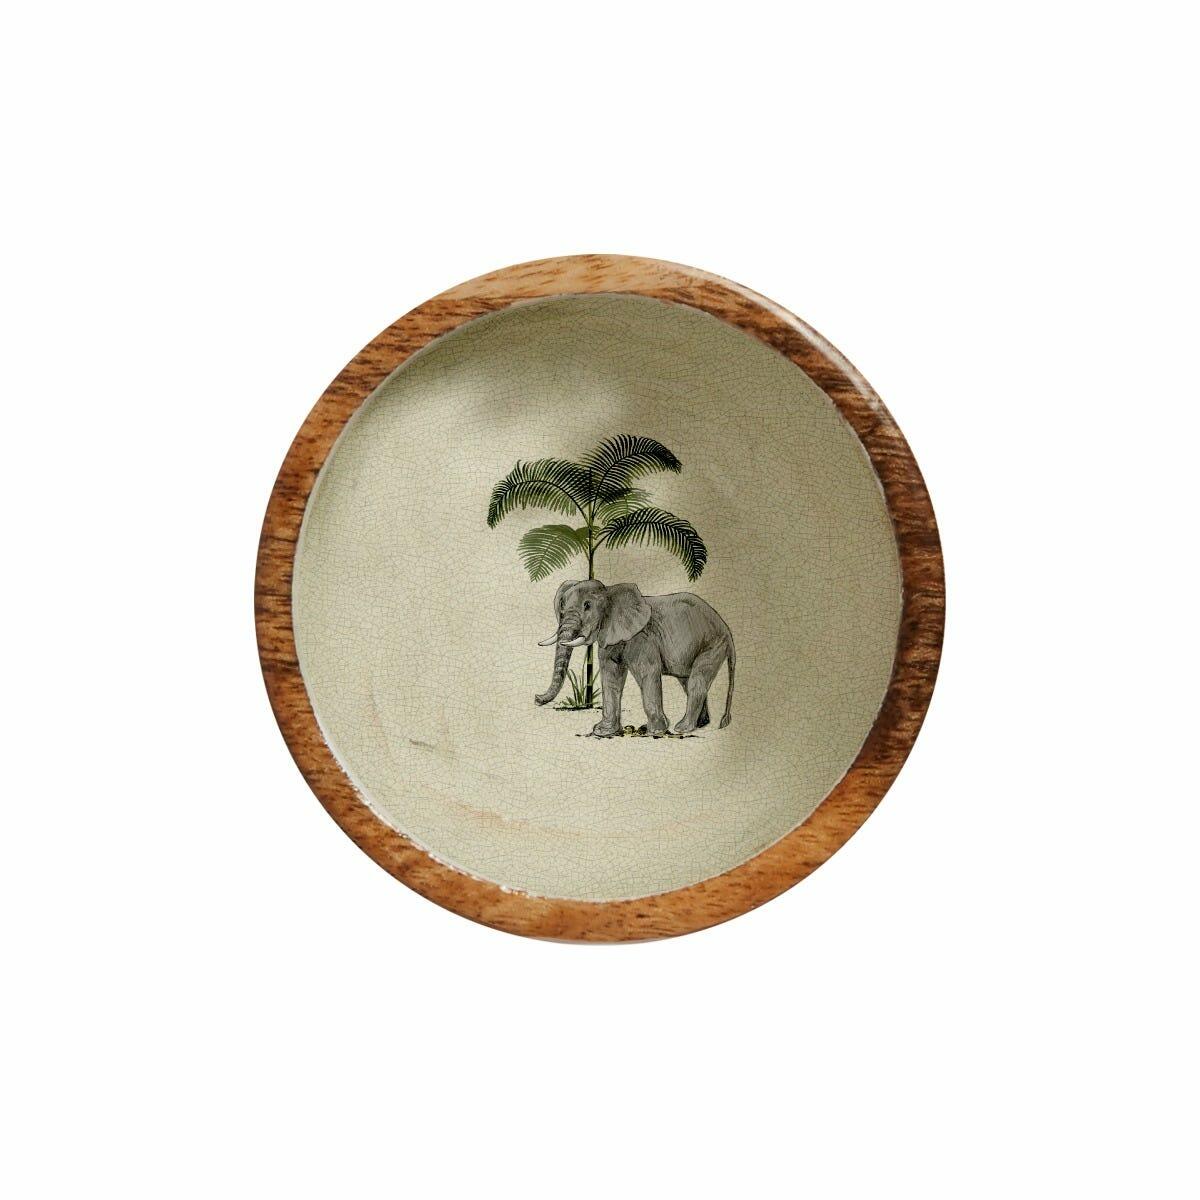 Club Matters Out of Africa Elephant Nibble Bowl, Fortnum & Mason